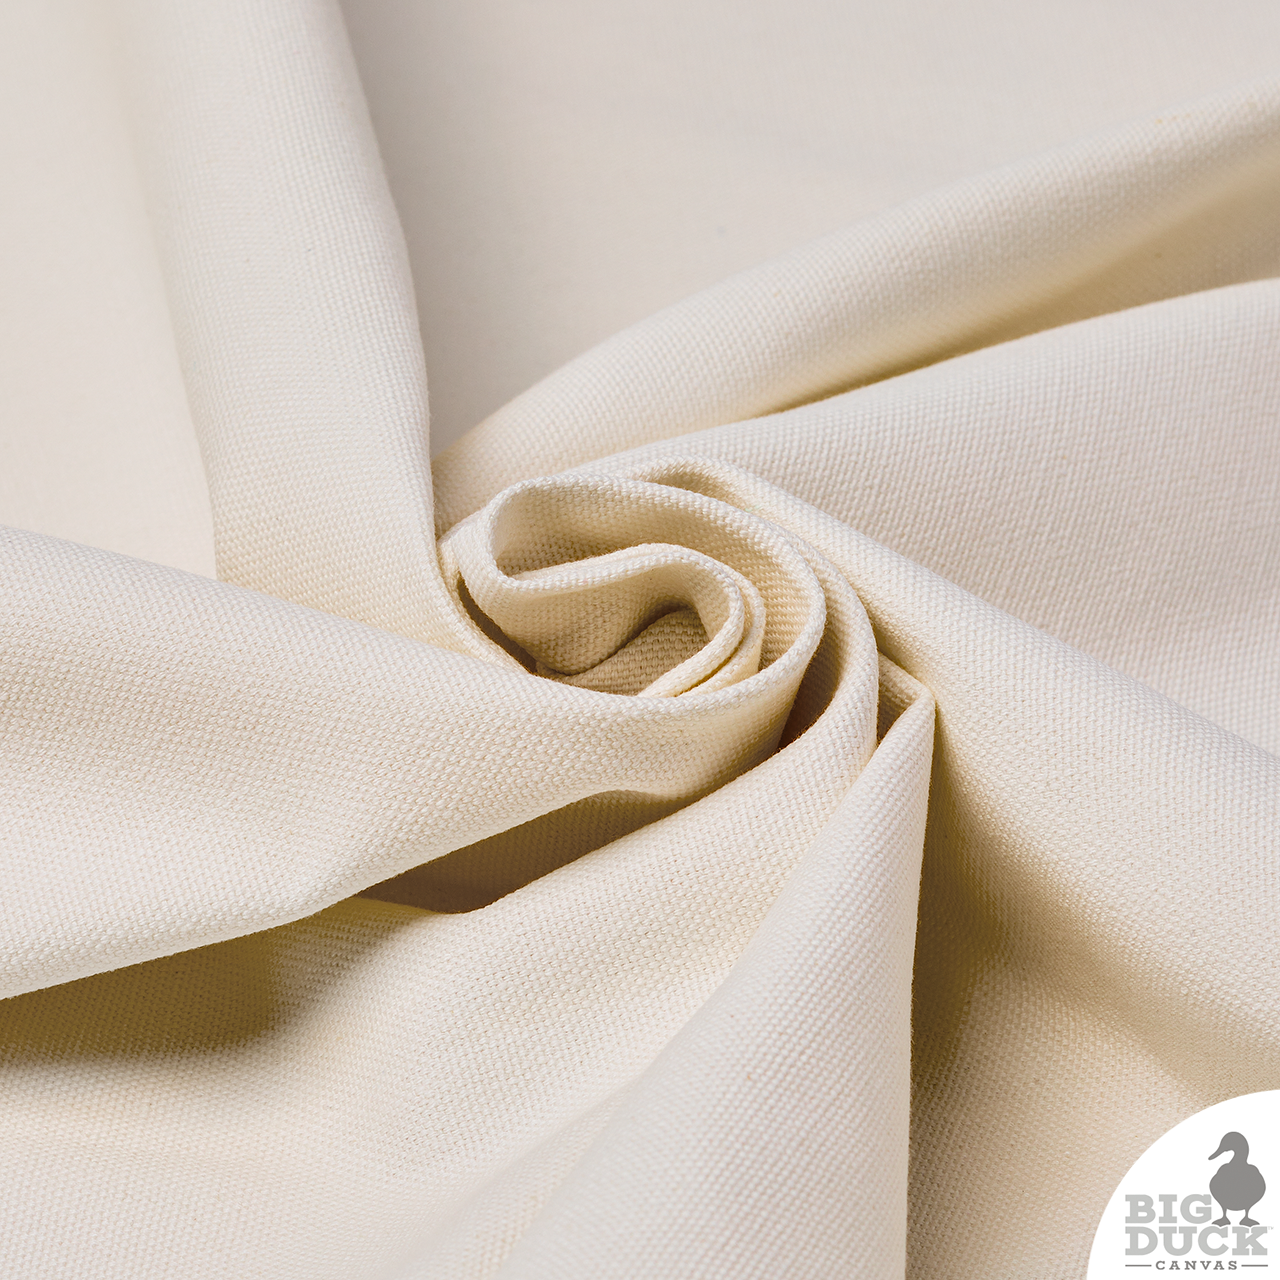 White Fabric - White Cloths by the Yard